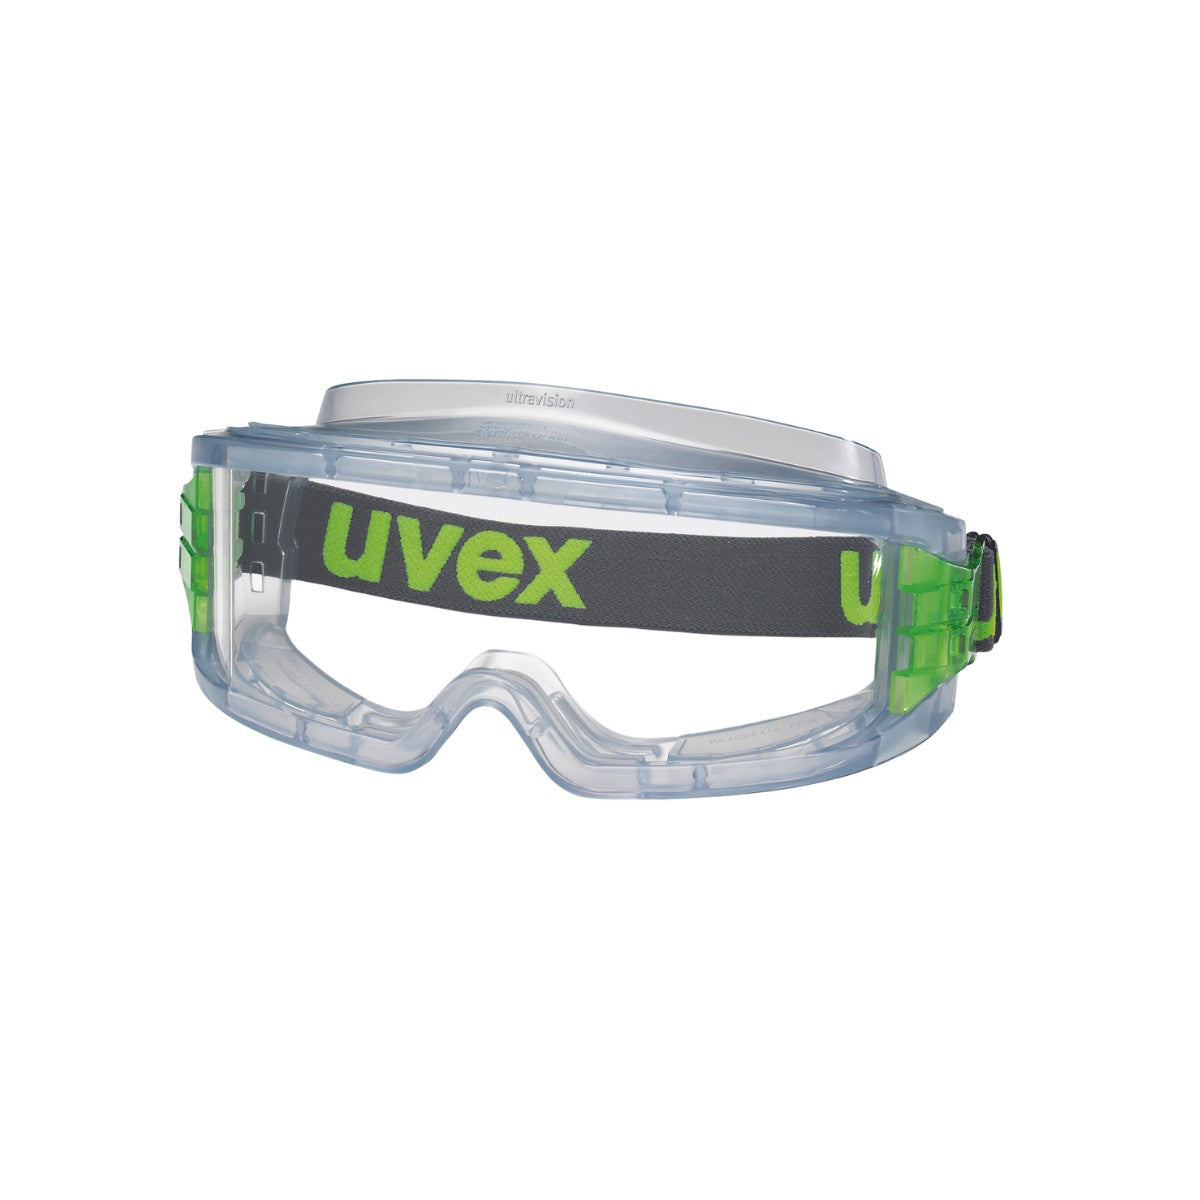 uvex Ultravision Safety Goggles - Clear Acetate Lens 9301-614 (Each)